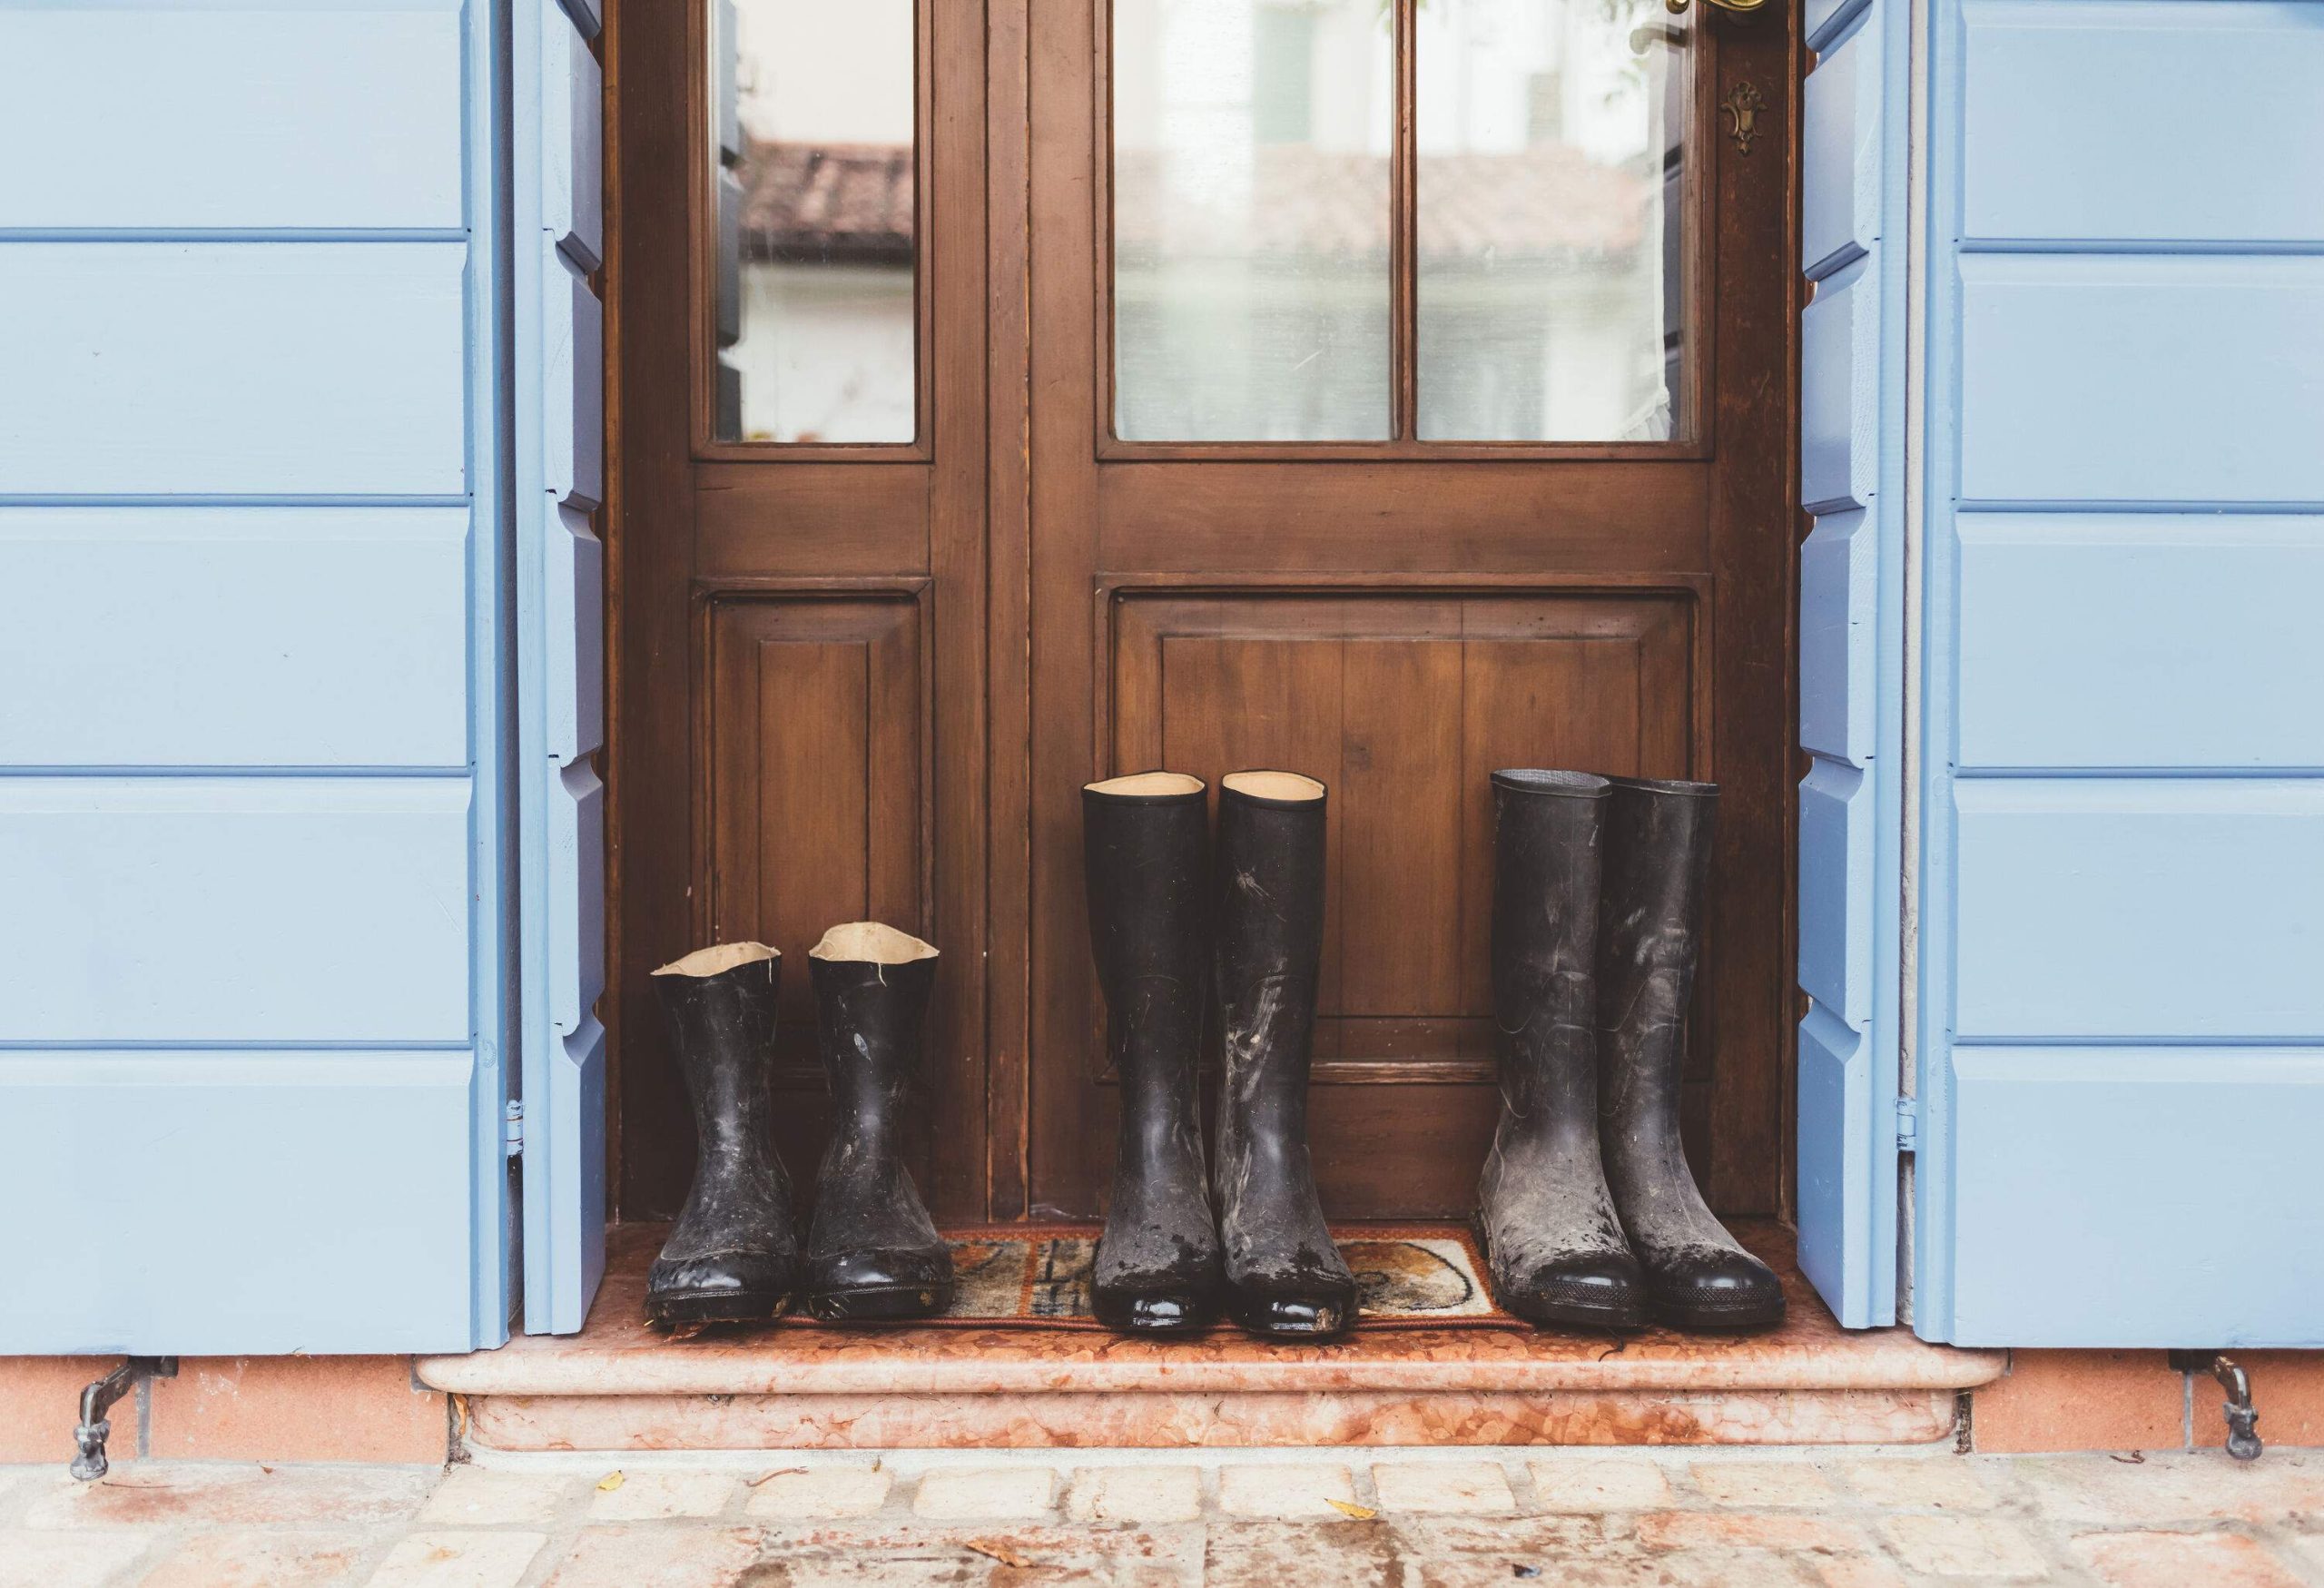 Three pairs of black rubber boots are in front of a wooden door.